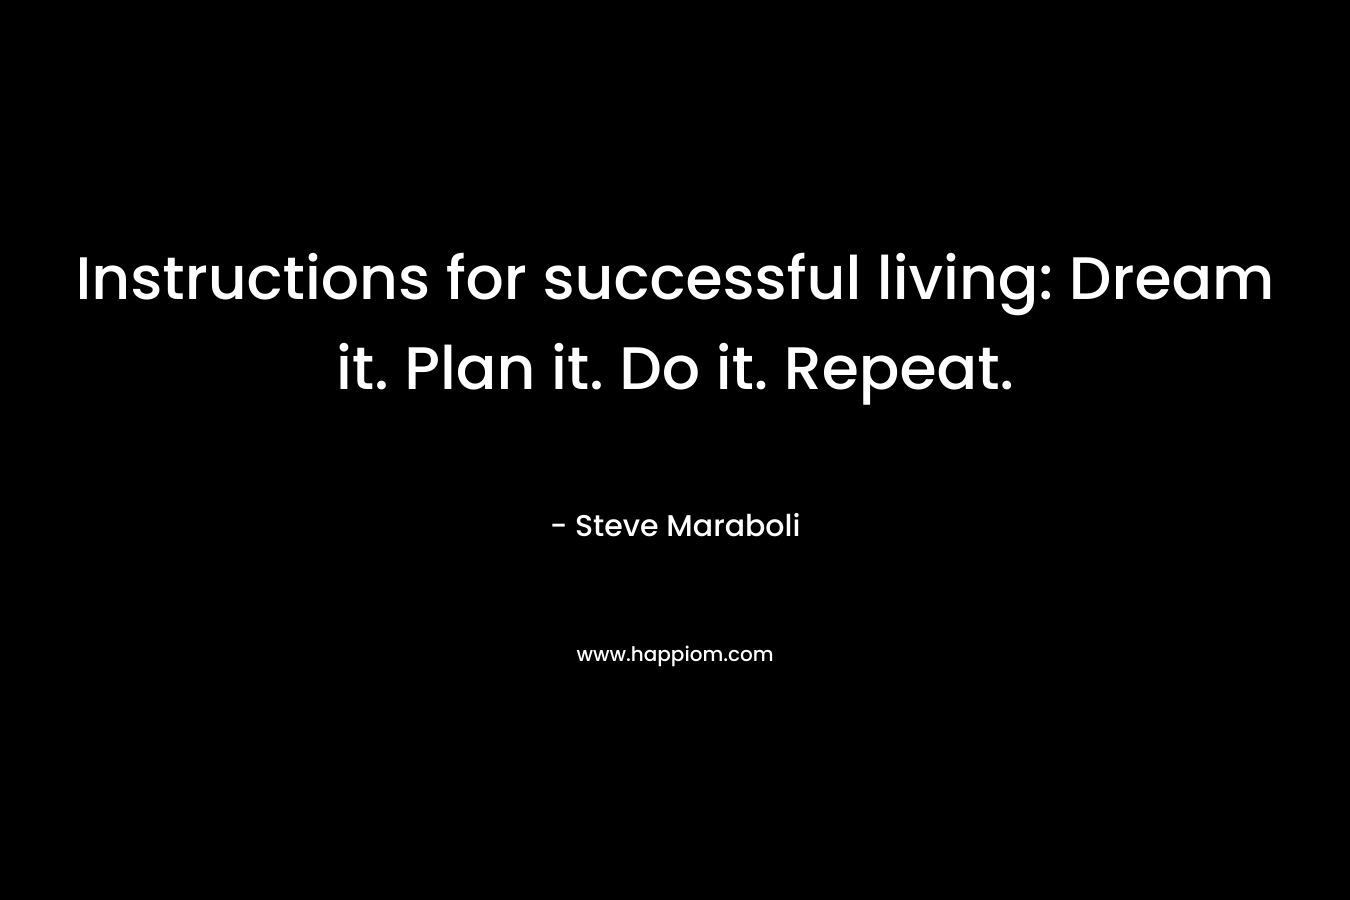 Instructions for successful living: Dream it. Plan it. Do it. Repeat.